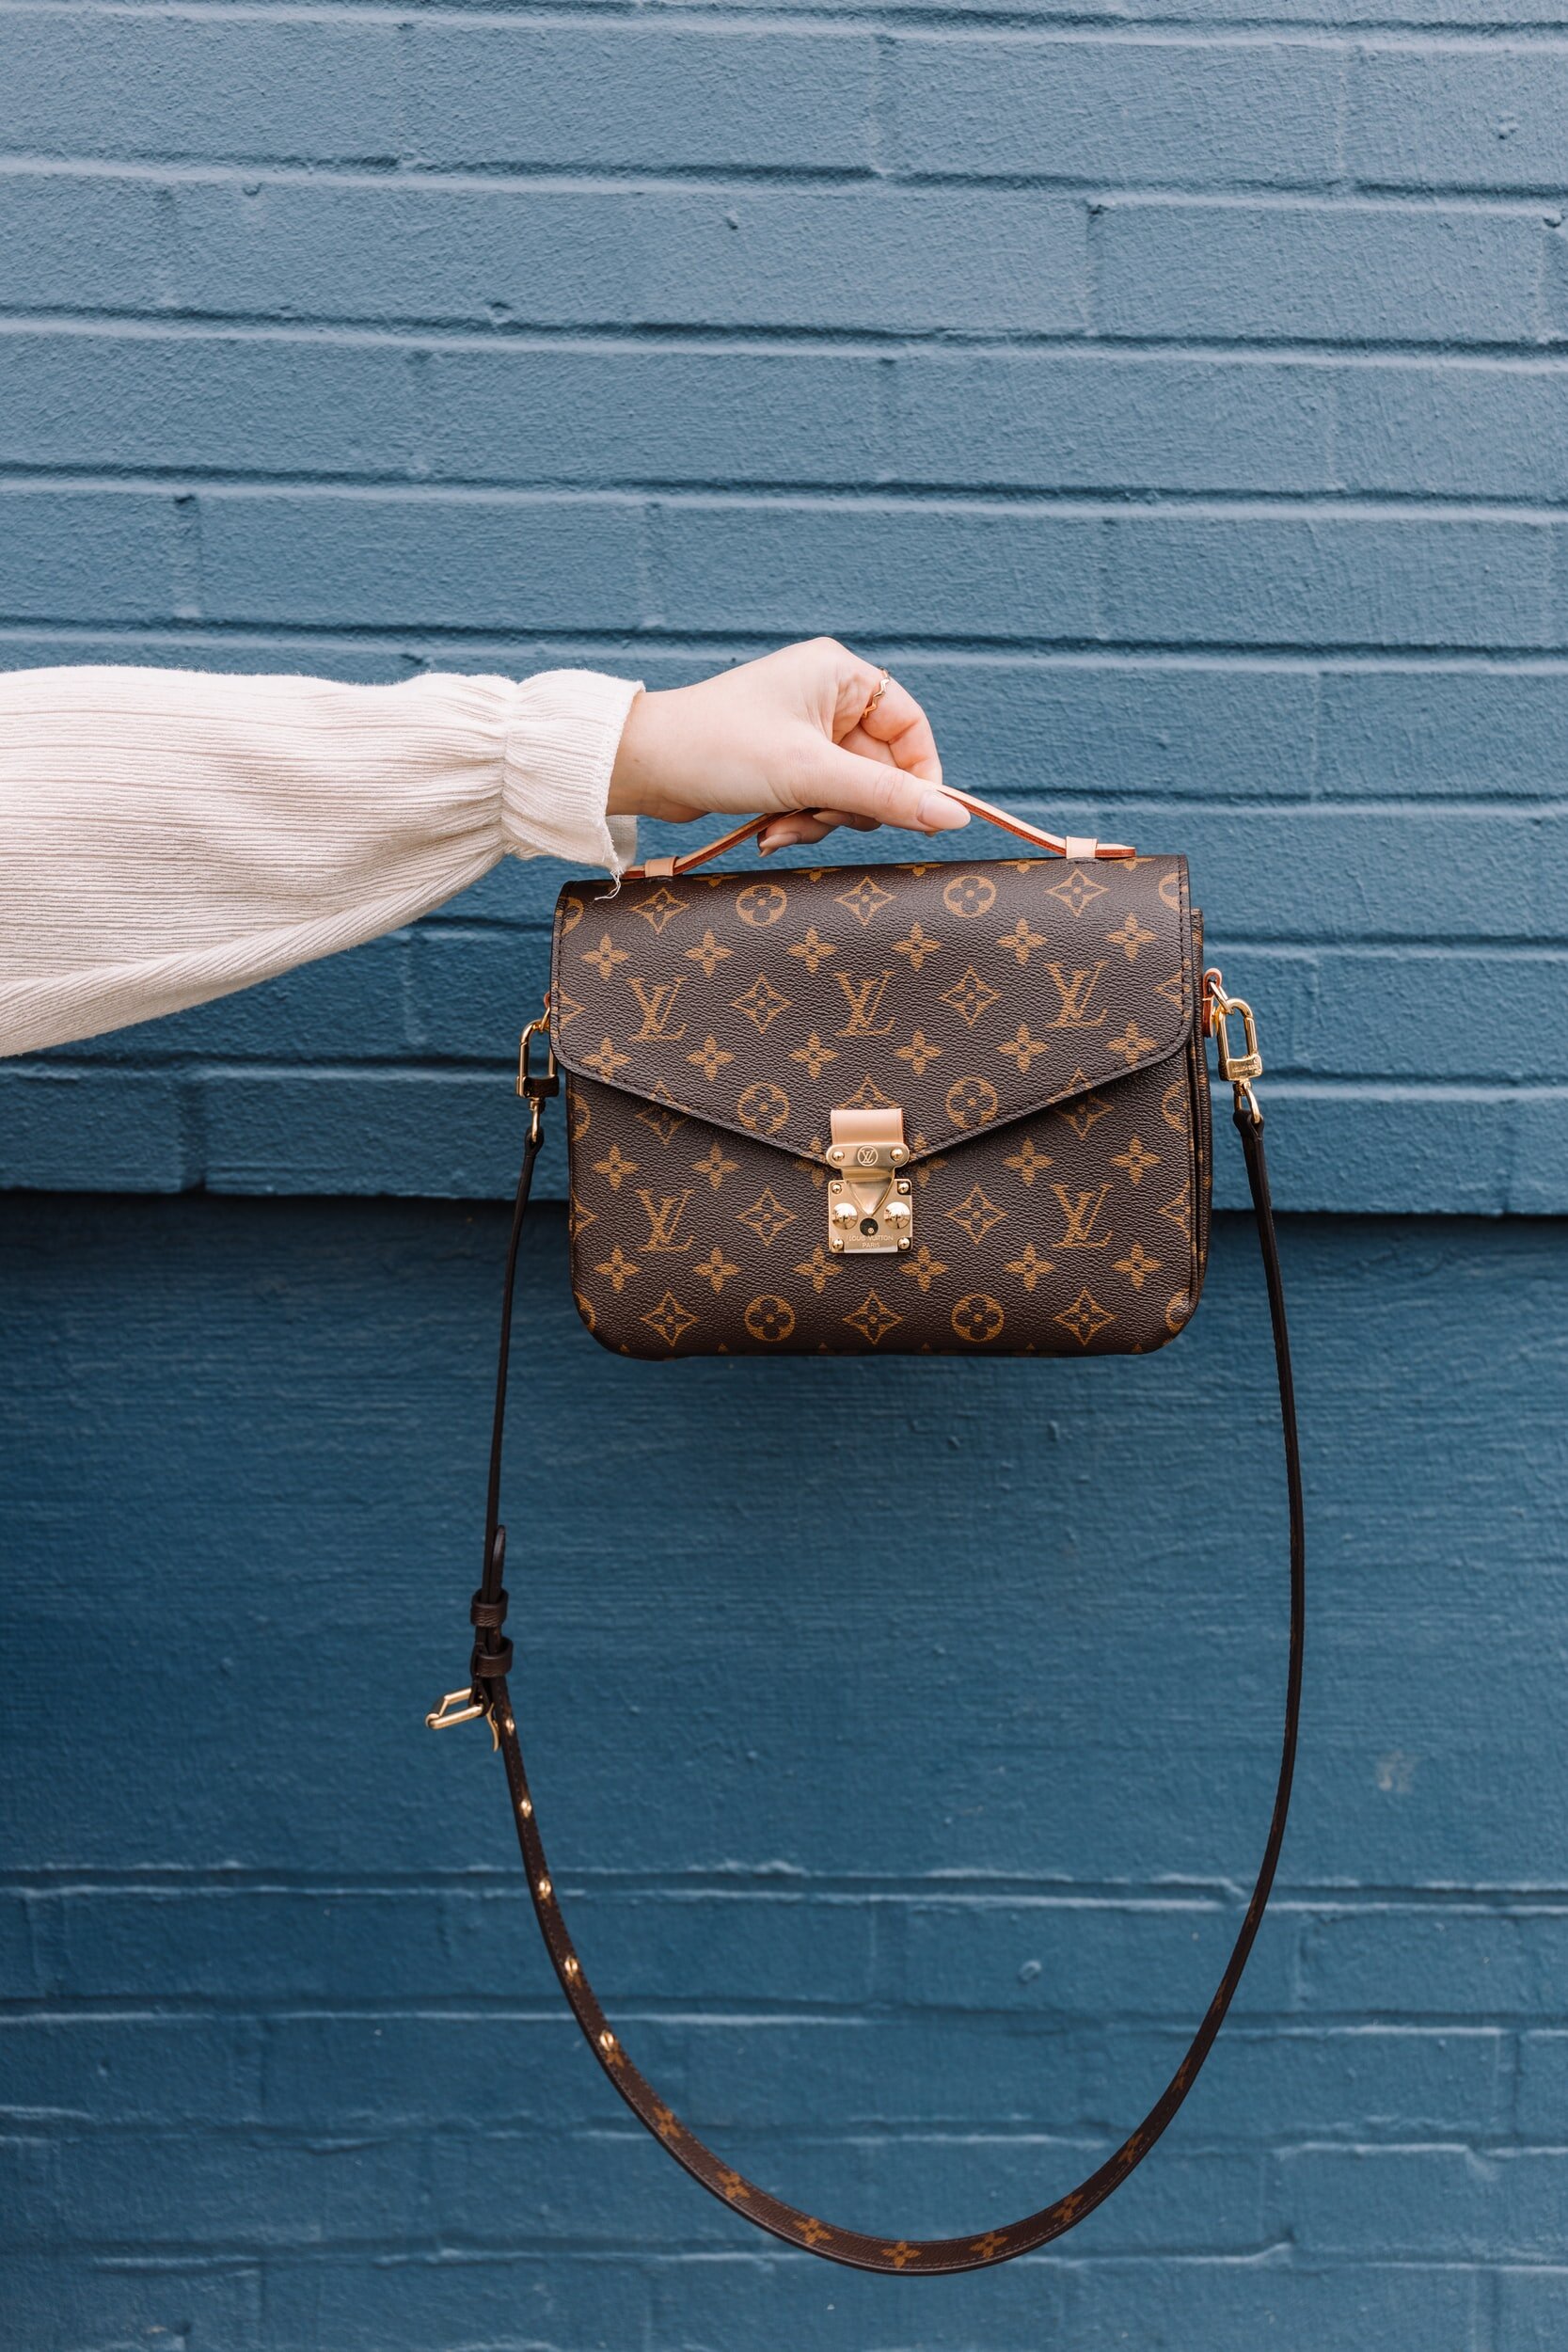 Confessions of an (LV) Addict